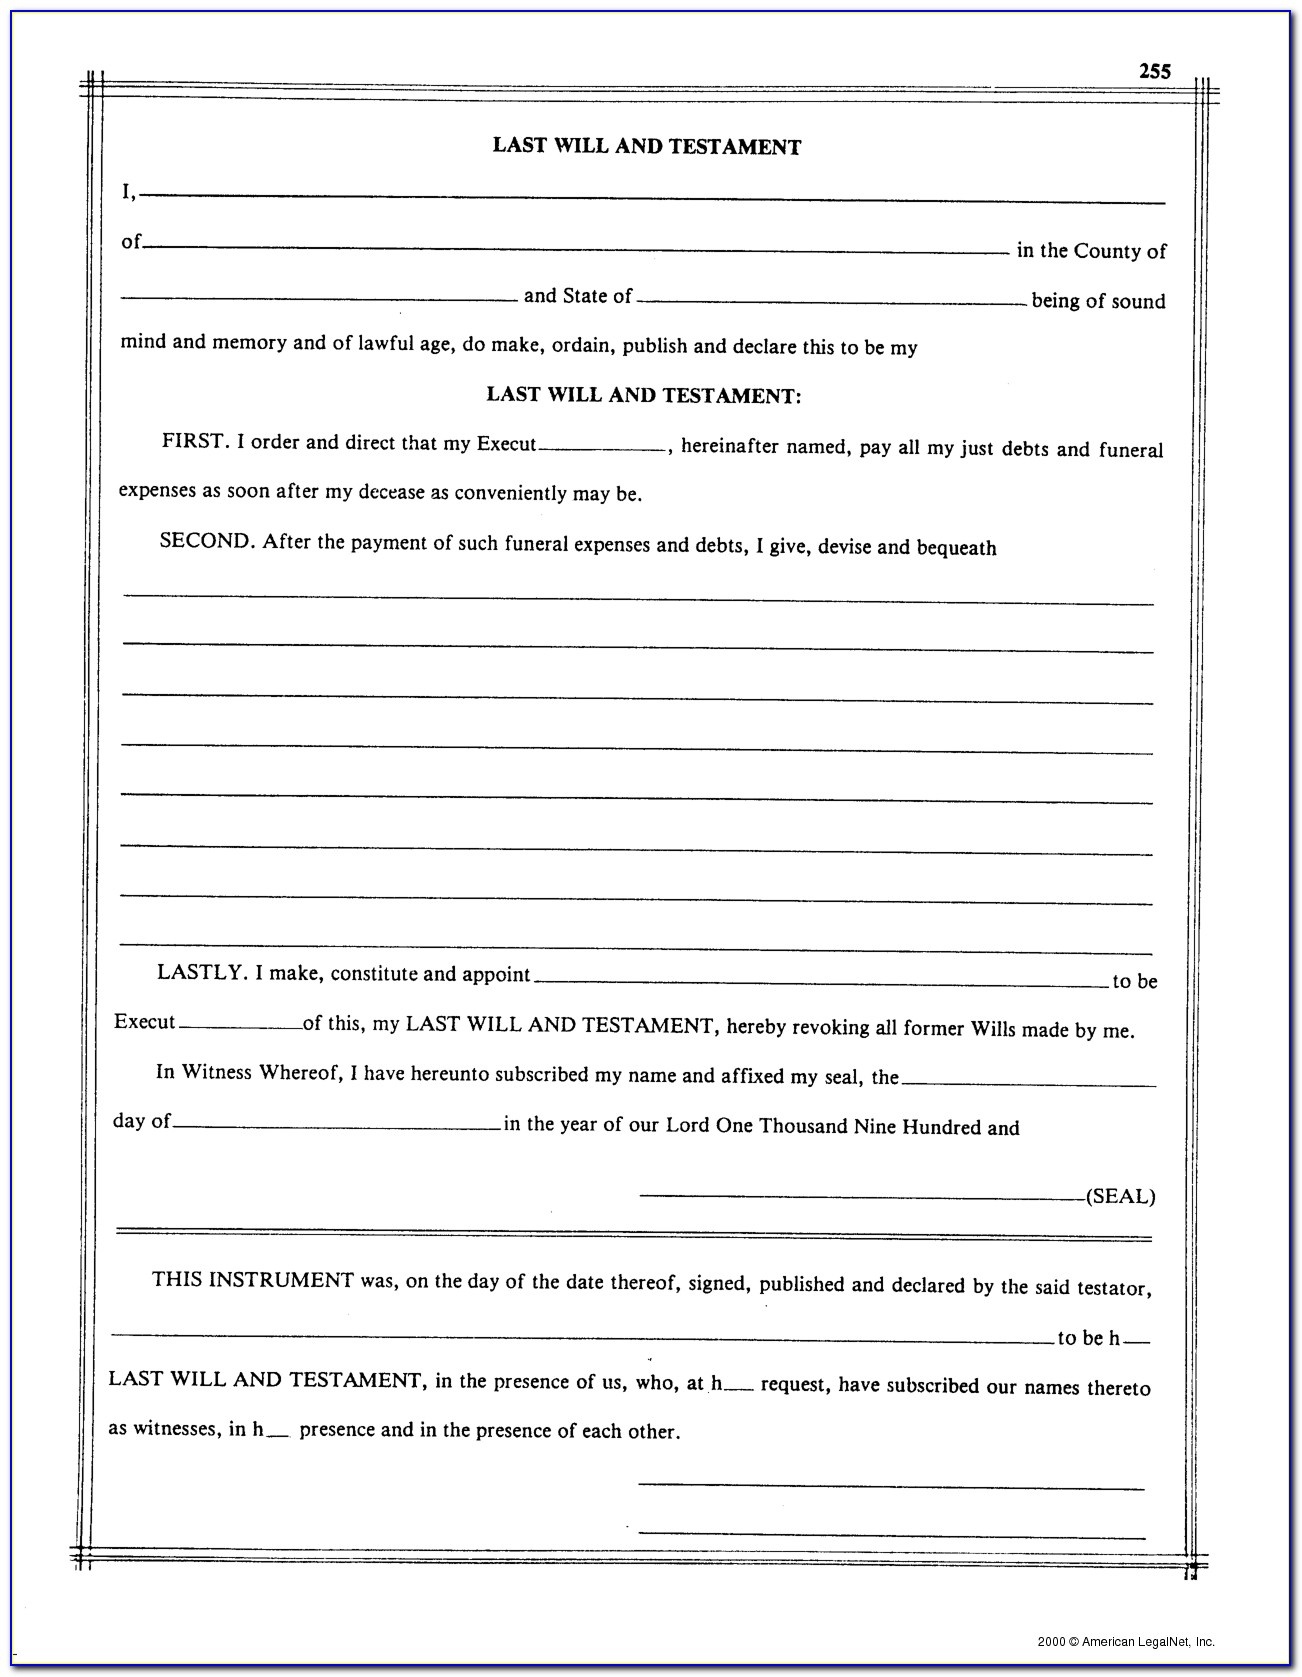 Free Printable Blank Last Will And Testament Forms - Form : Resume - Free Printable Last Will And Testament Blank Forms